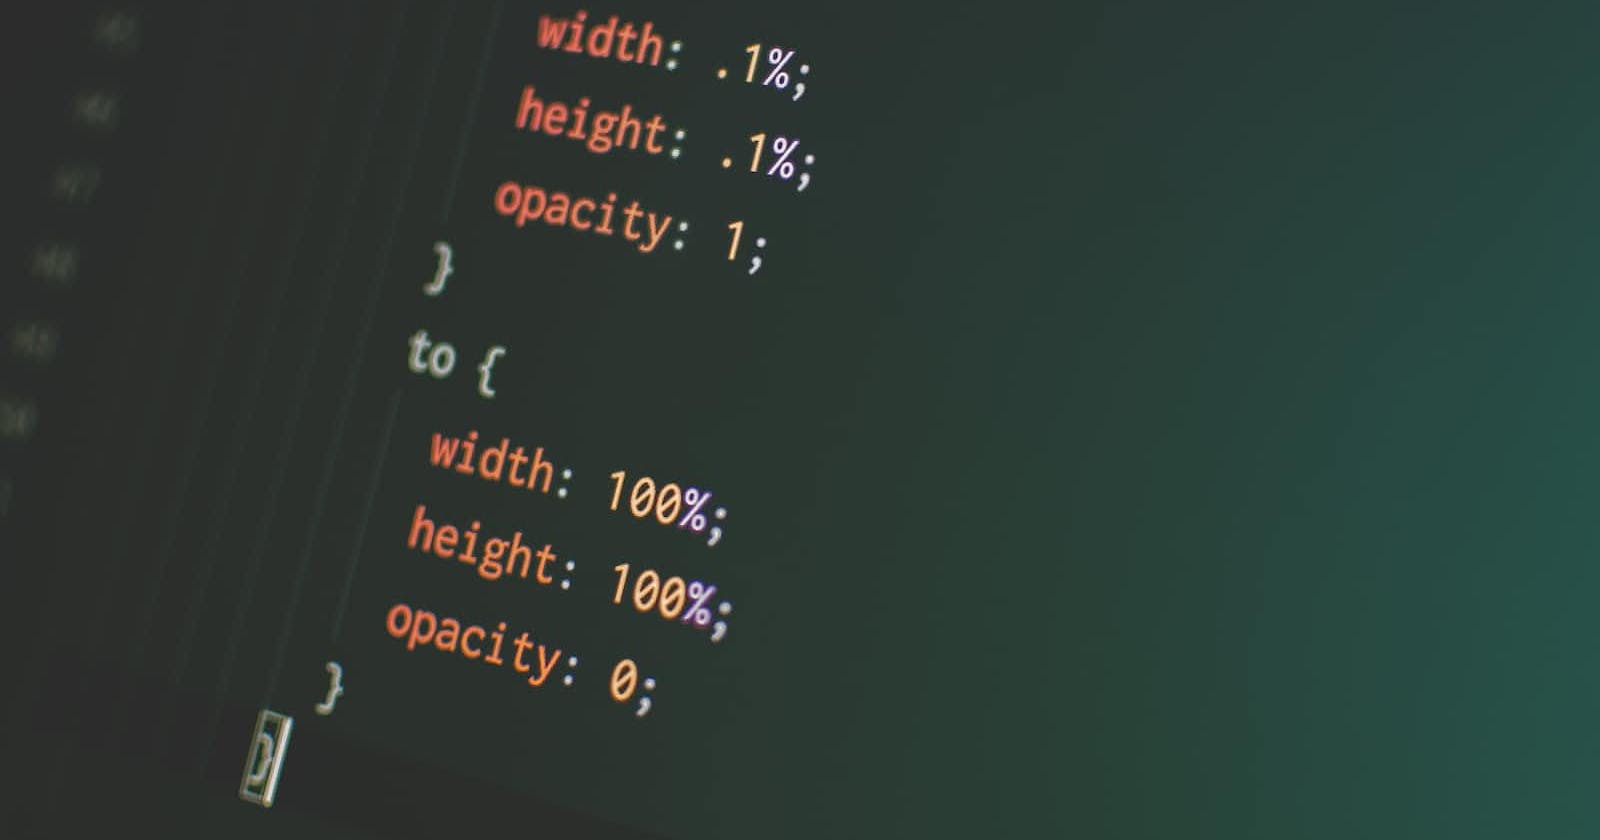 Html, CSS, and Javascript: the building blocks of modern web2